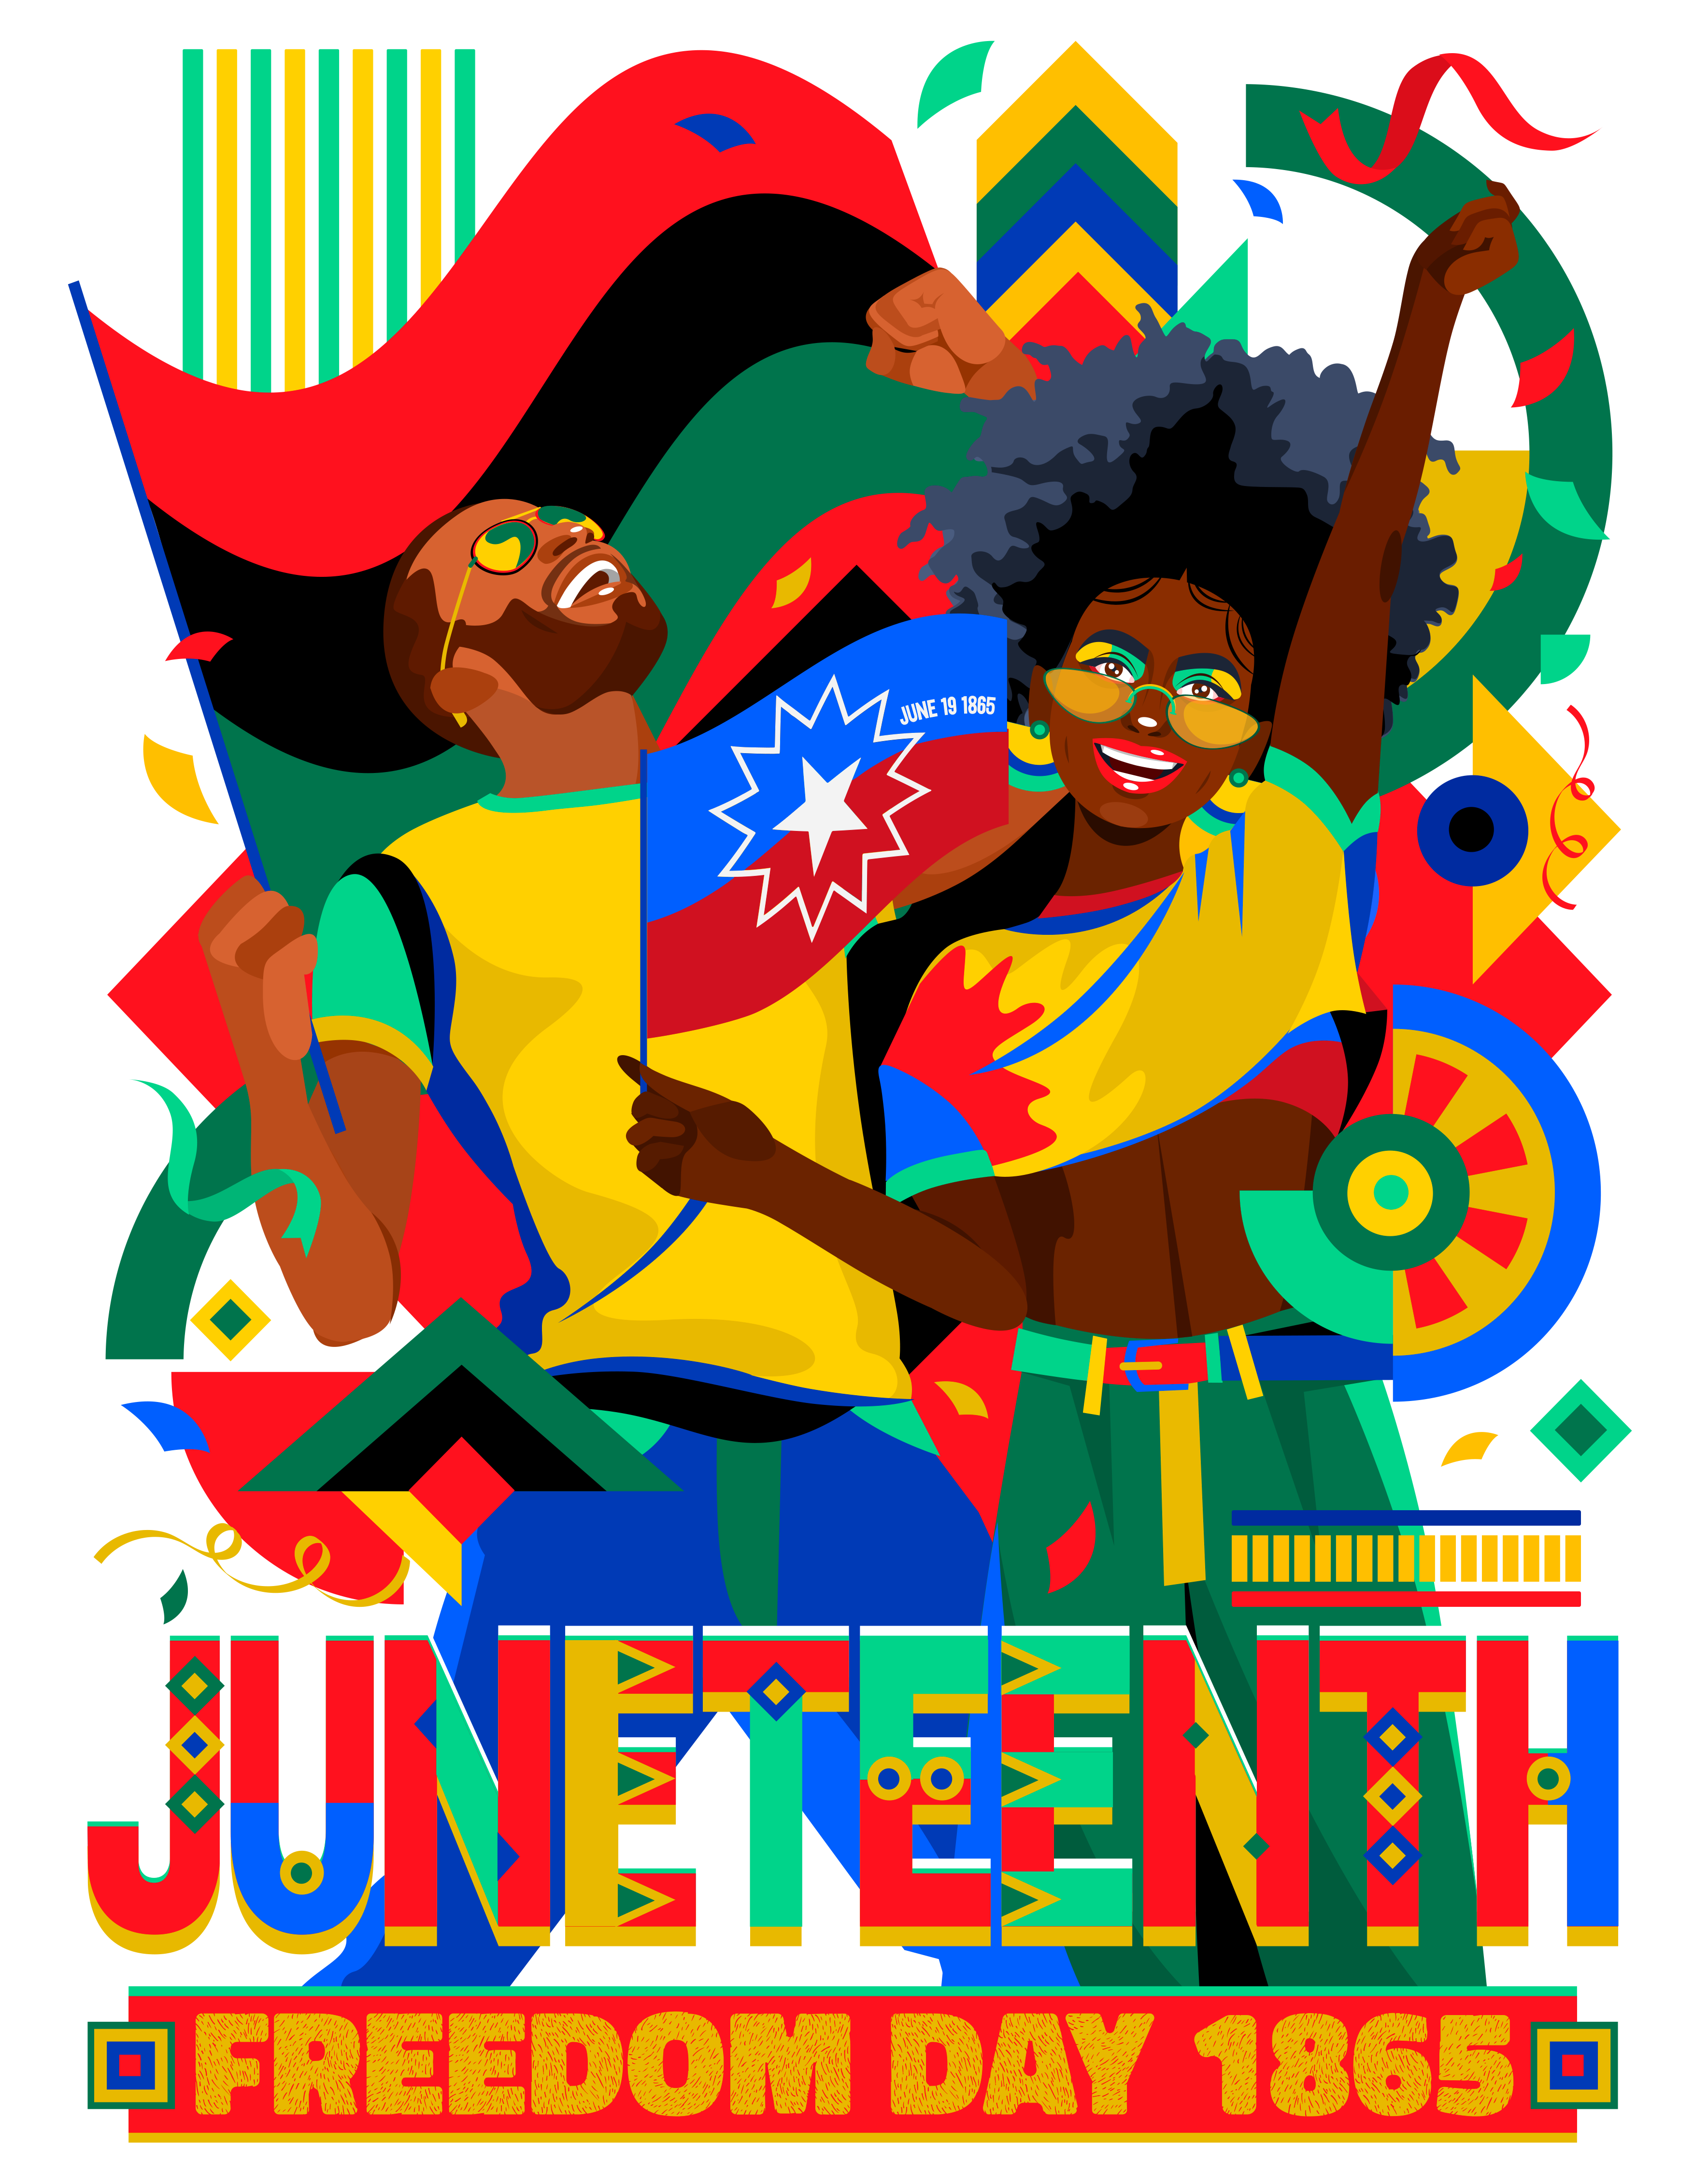 shirts for juneteenth, juneteenth festival, party, celebration, apparel